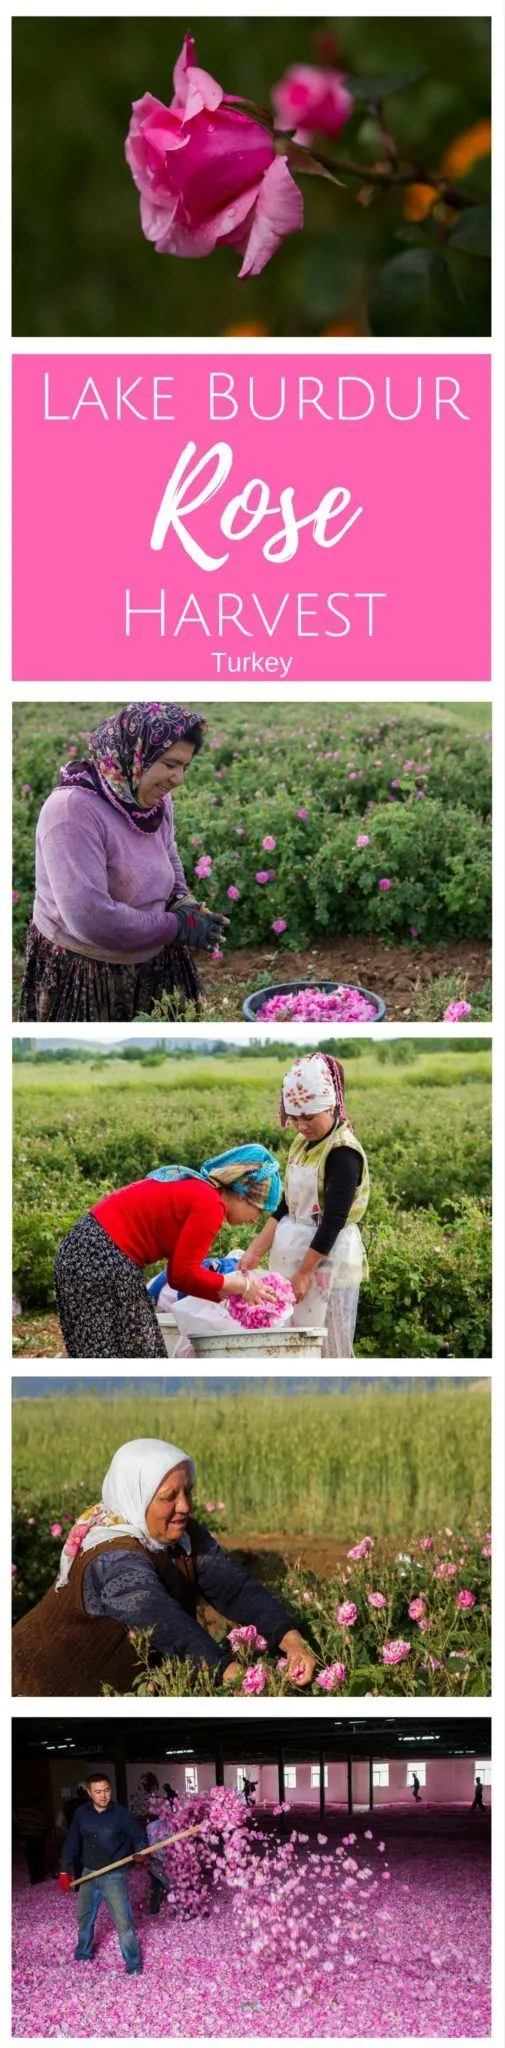 Every year the Turkish rose harvest takes over the area around Lake Burdur, and we got to help out! Click here to find out more!